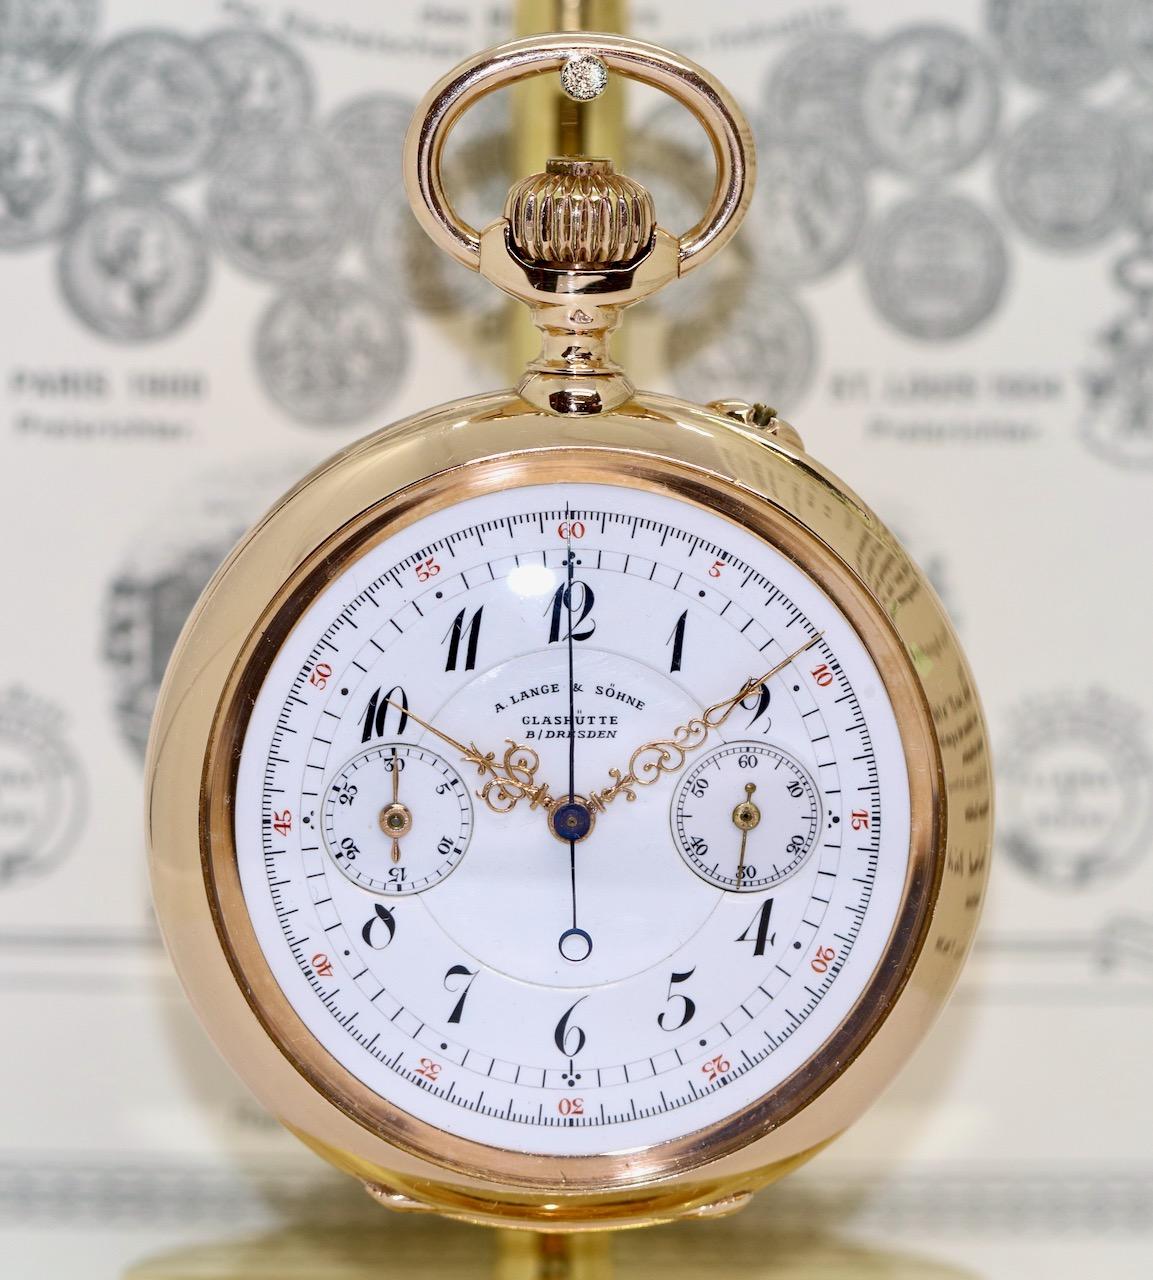 This exquisite and rare pocket watch from A. Lange & Söhne represents an extraordinary combination of historical craftsmanship and timeless elegance. Manufactured around 1898, it embodies the high art of Saxon watchmaking tradition.

The heart of